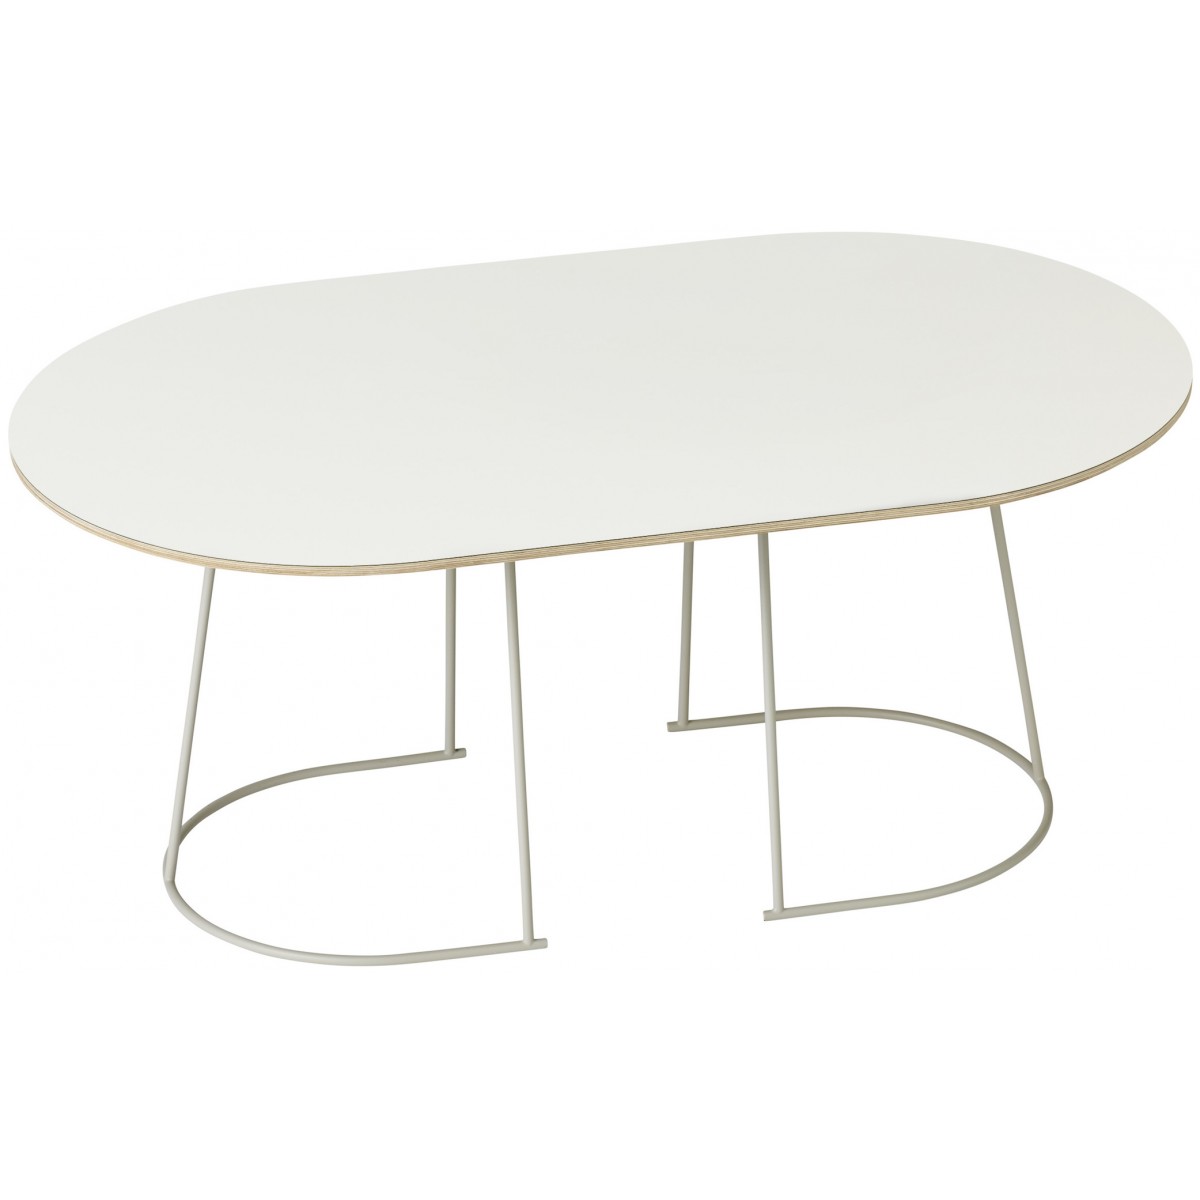 M - off-white - Airy table